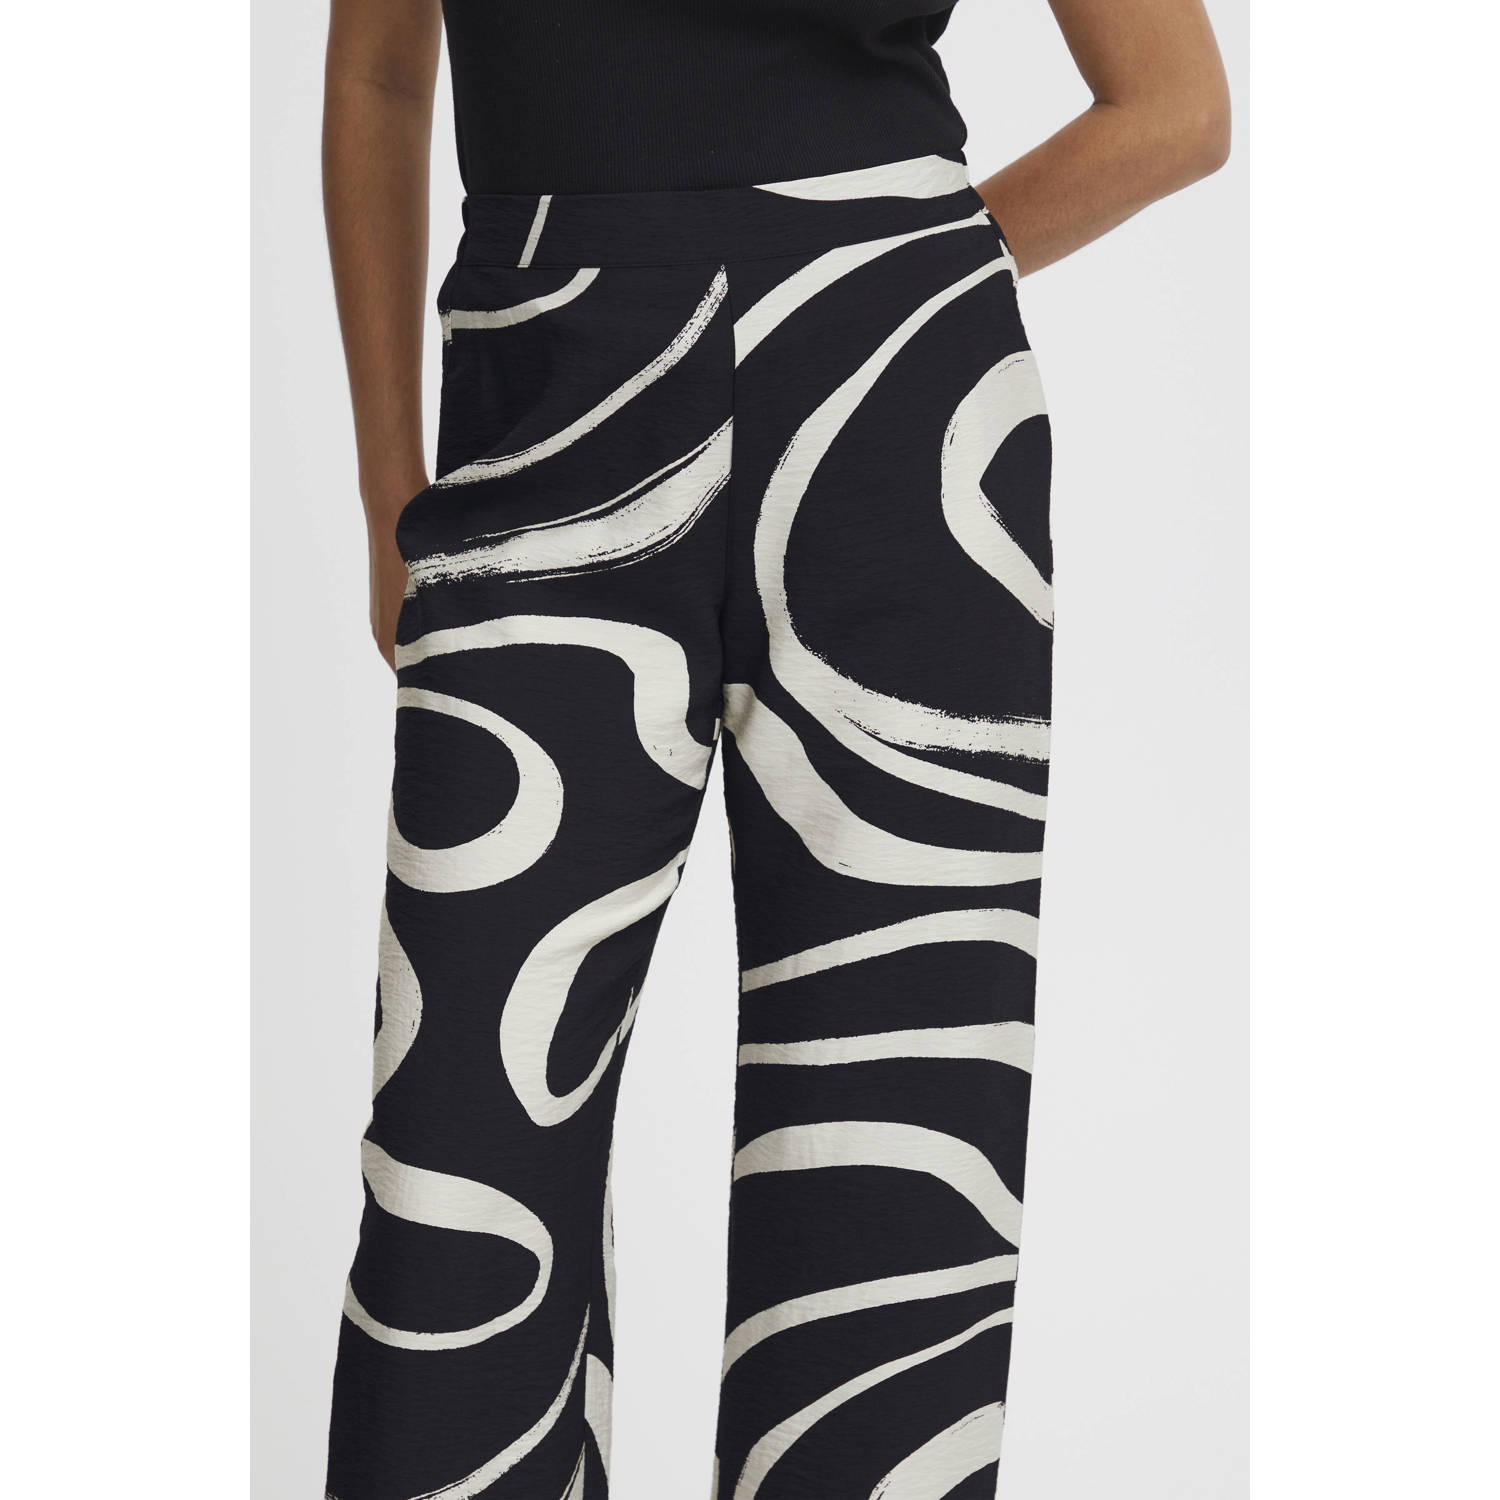 B.Young straight fit pantalon BYIBINE met all over print zwart wit